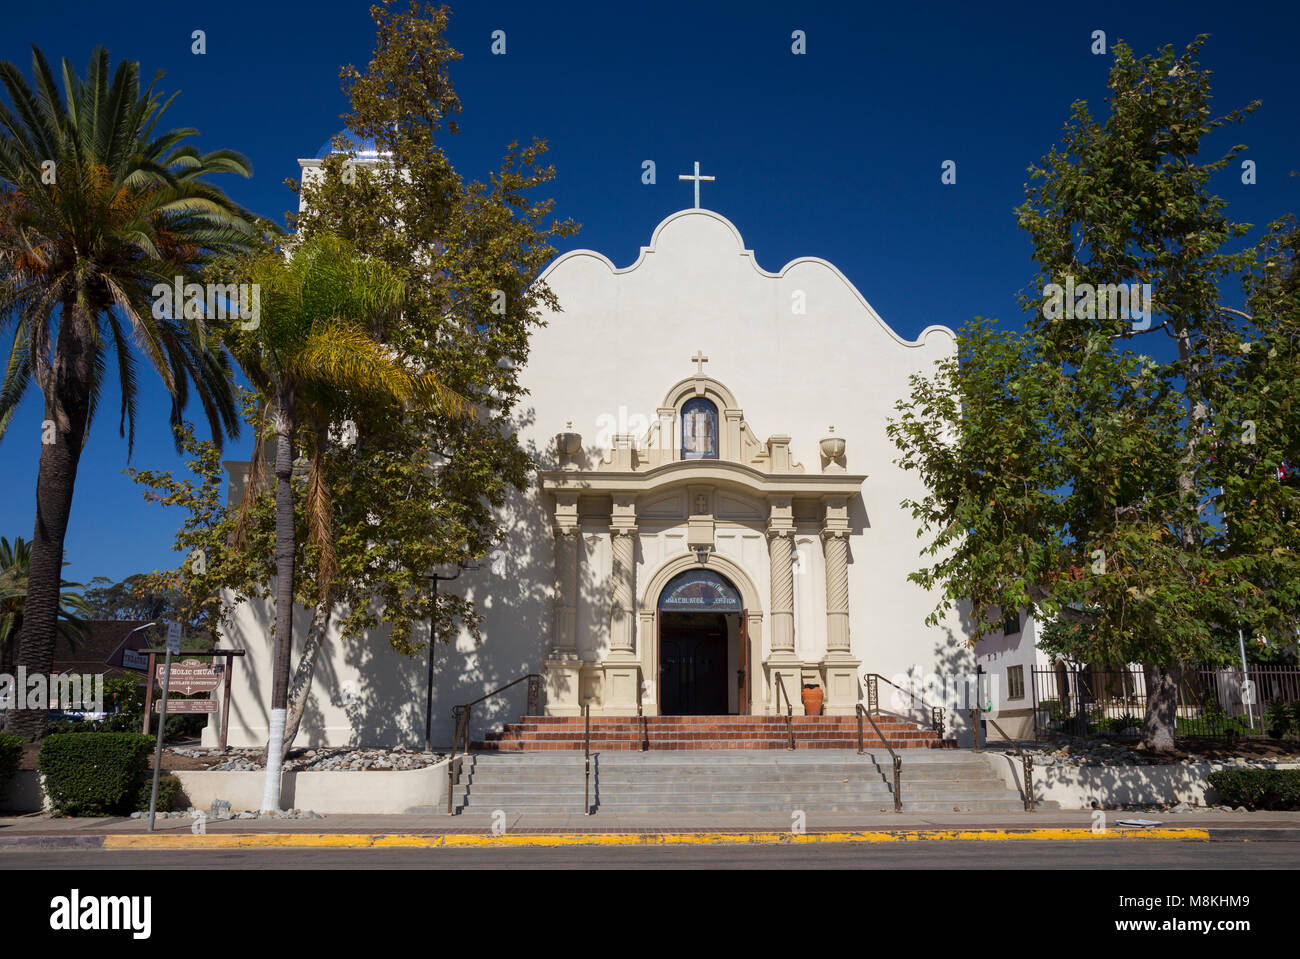 Church of the Immaculate Conception, San Diego State Historic Park, California, USA Stock Photo